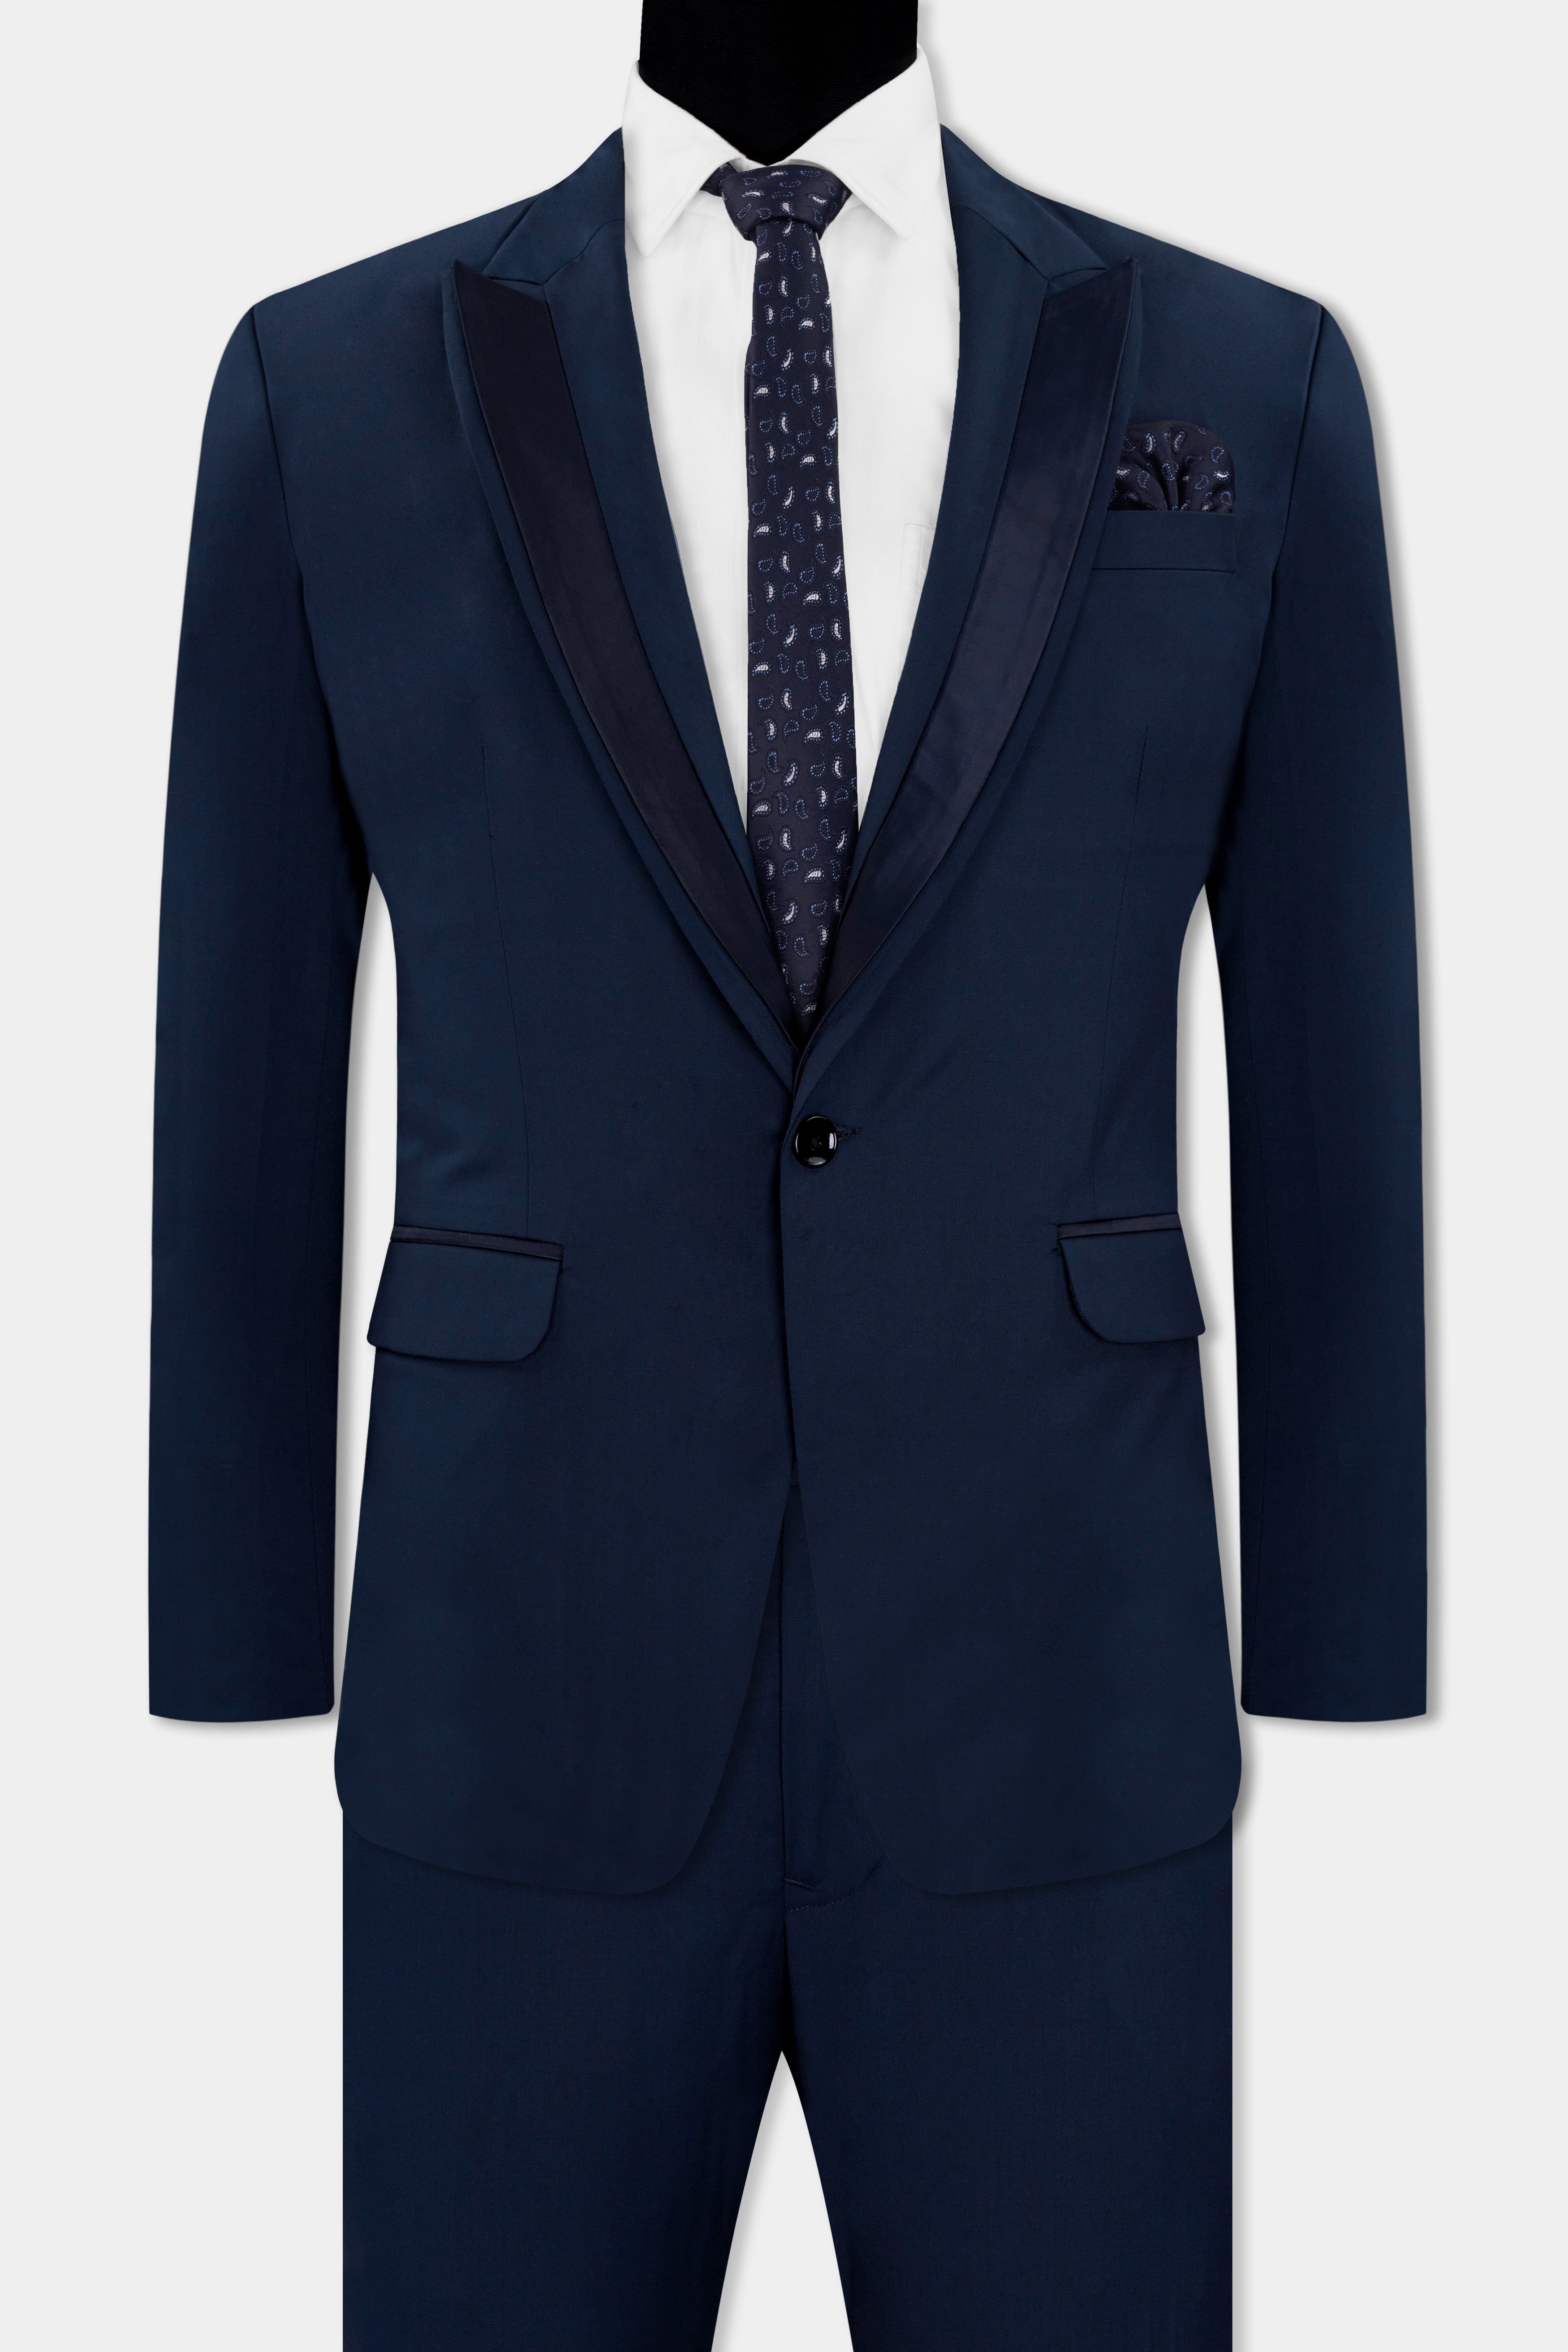 Custom Suits Online | Dress the Real You - Hockerty